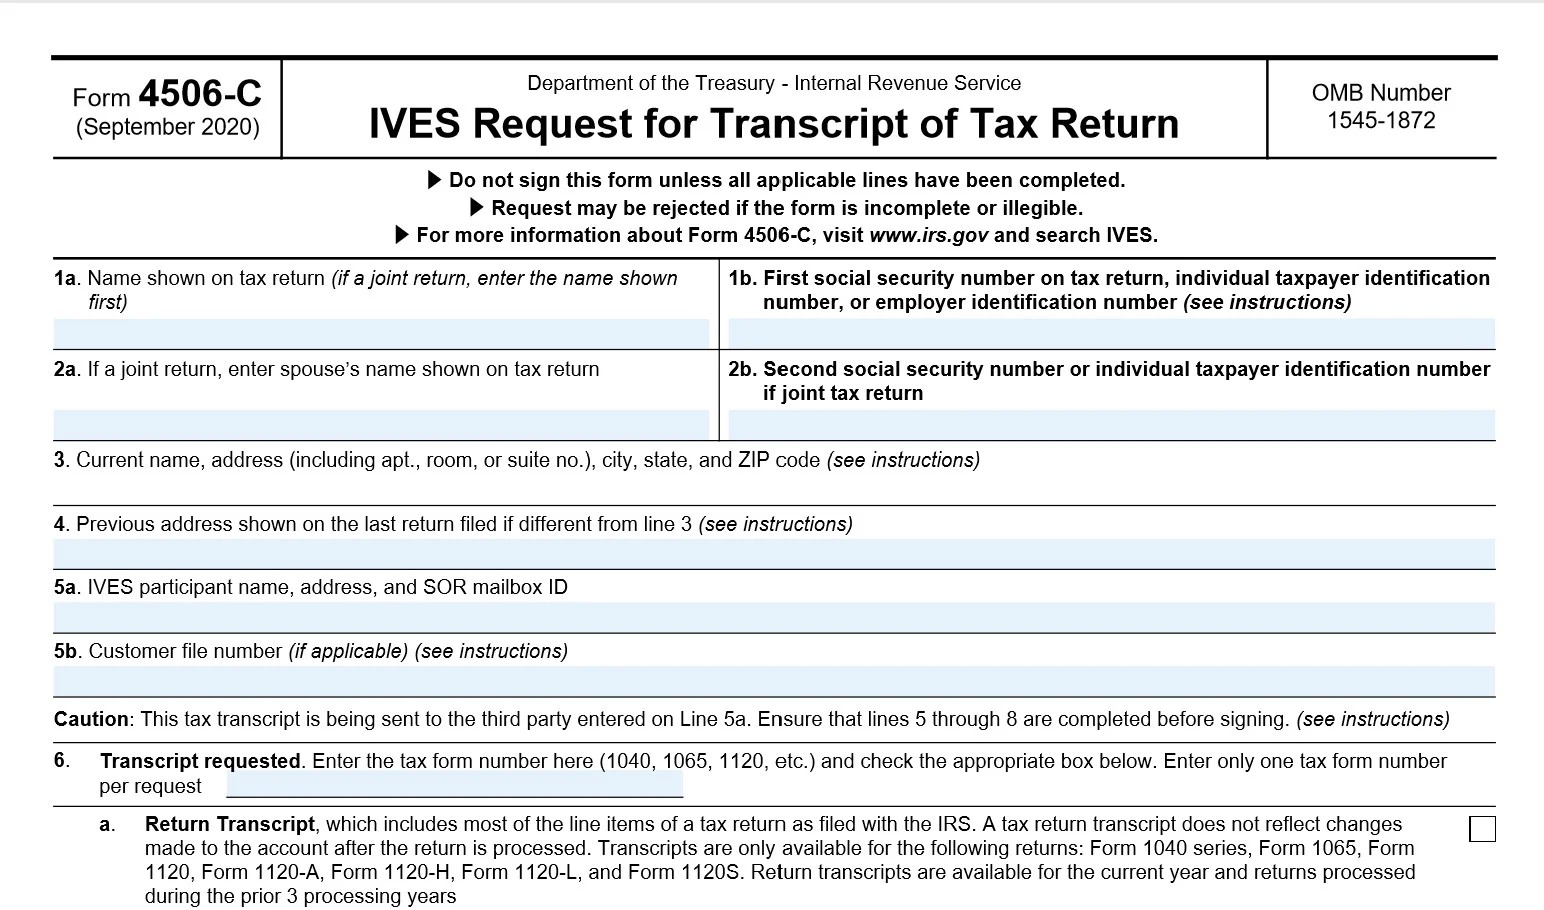 What Is IRS Form 4506-C?